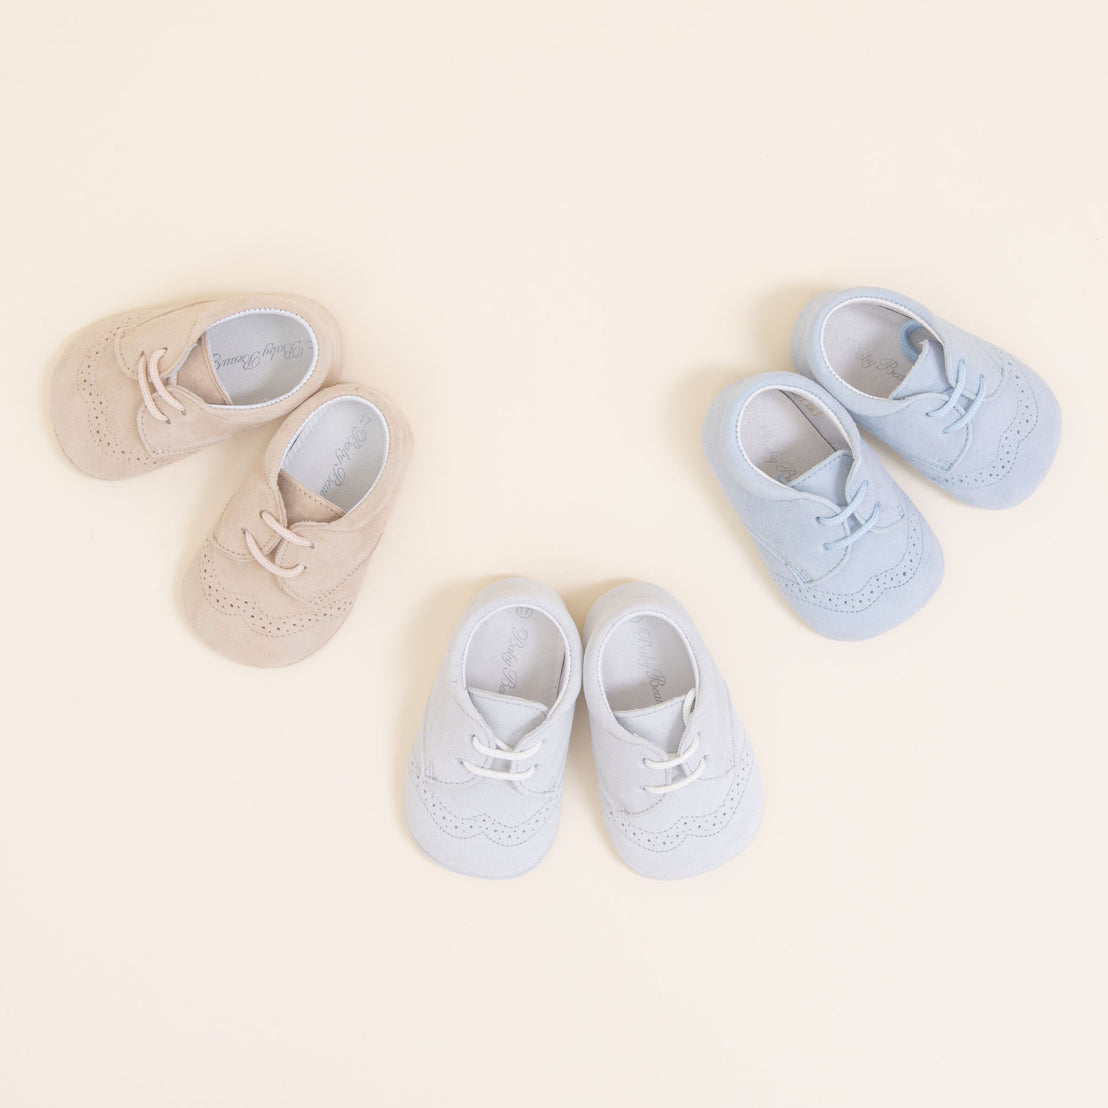 Flat lay photo of three pairs of Theodore Suede Shoes. Made from 100% suede with detailed edging. Available in colors blue, grey, and tan.